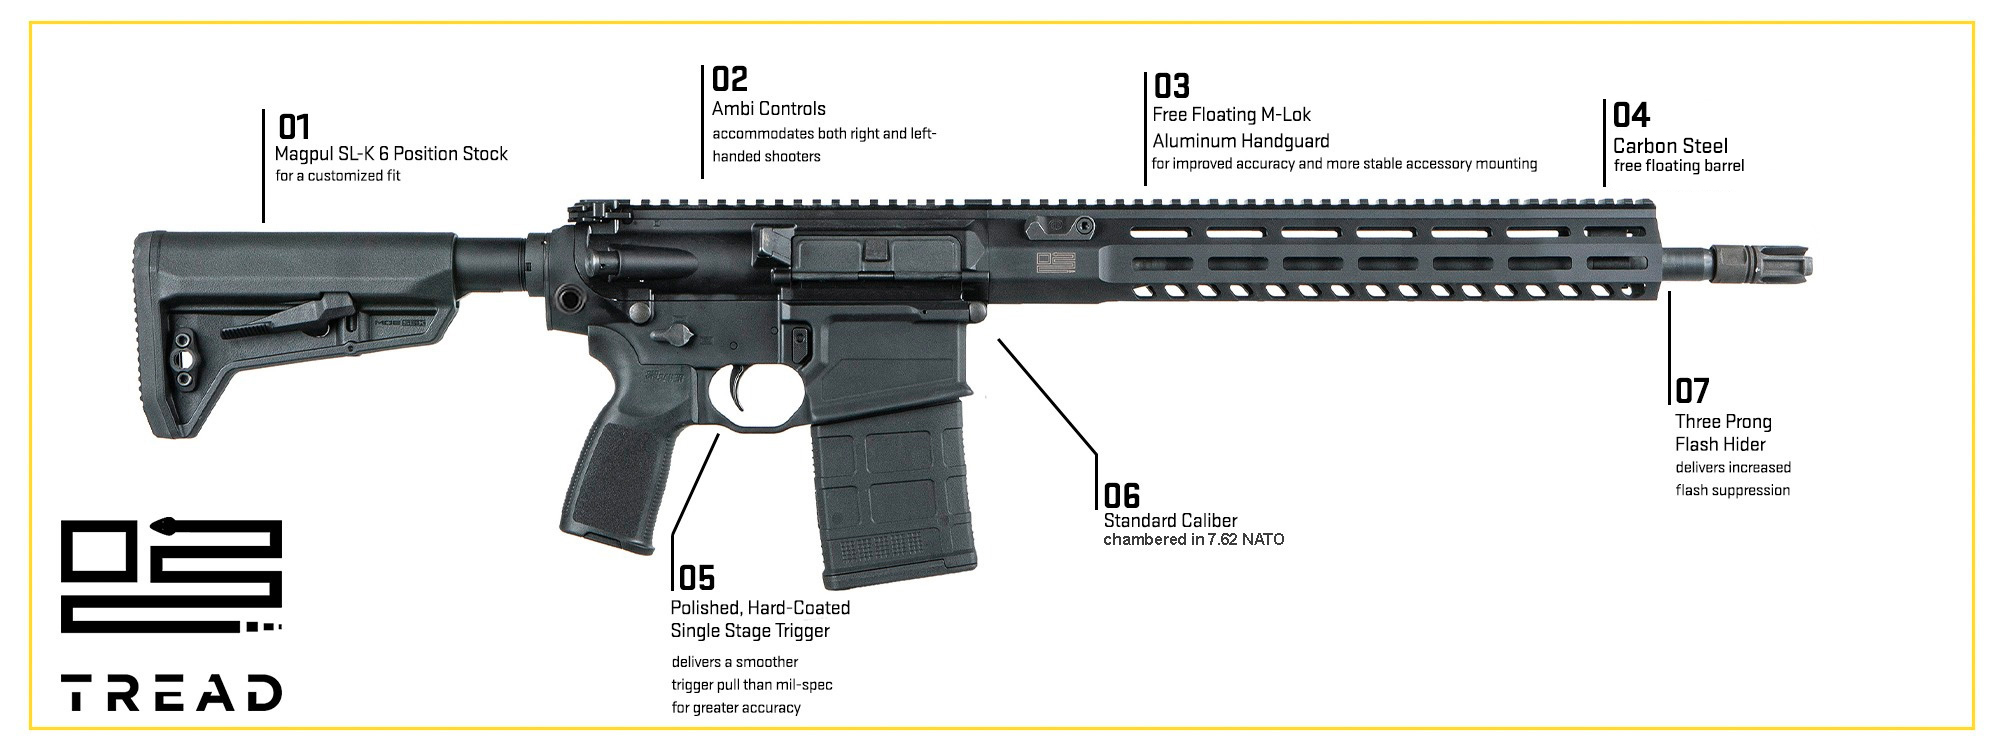 Features of the 716i TREAD, Standard Caliber chambered in 7.62 NATO, and M400 TREAD, Standard Caliber chambered in 5.56 NATO: Magpul SL-K 6 Position Stock for a customized fit, Ambidextrous Controls accommodate both right and left-handed shooters.